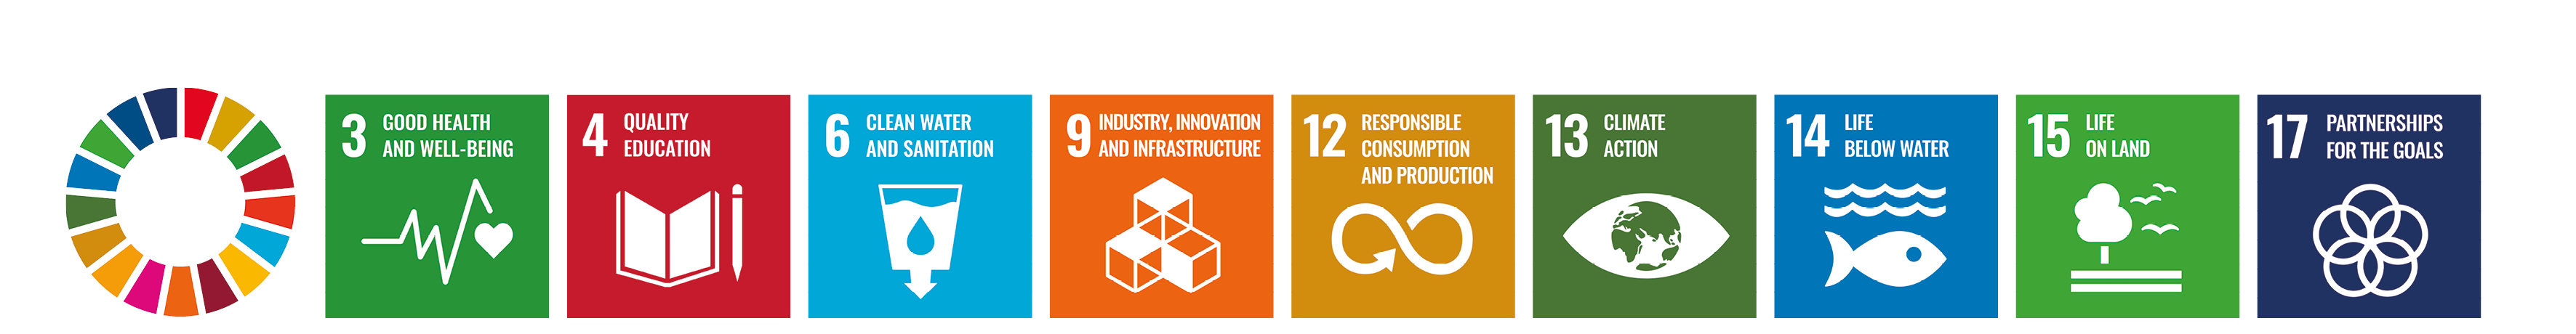 Sustainability goals of Wasser 3.0 - These are our contributions